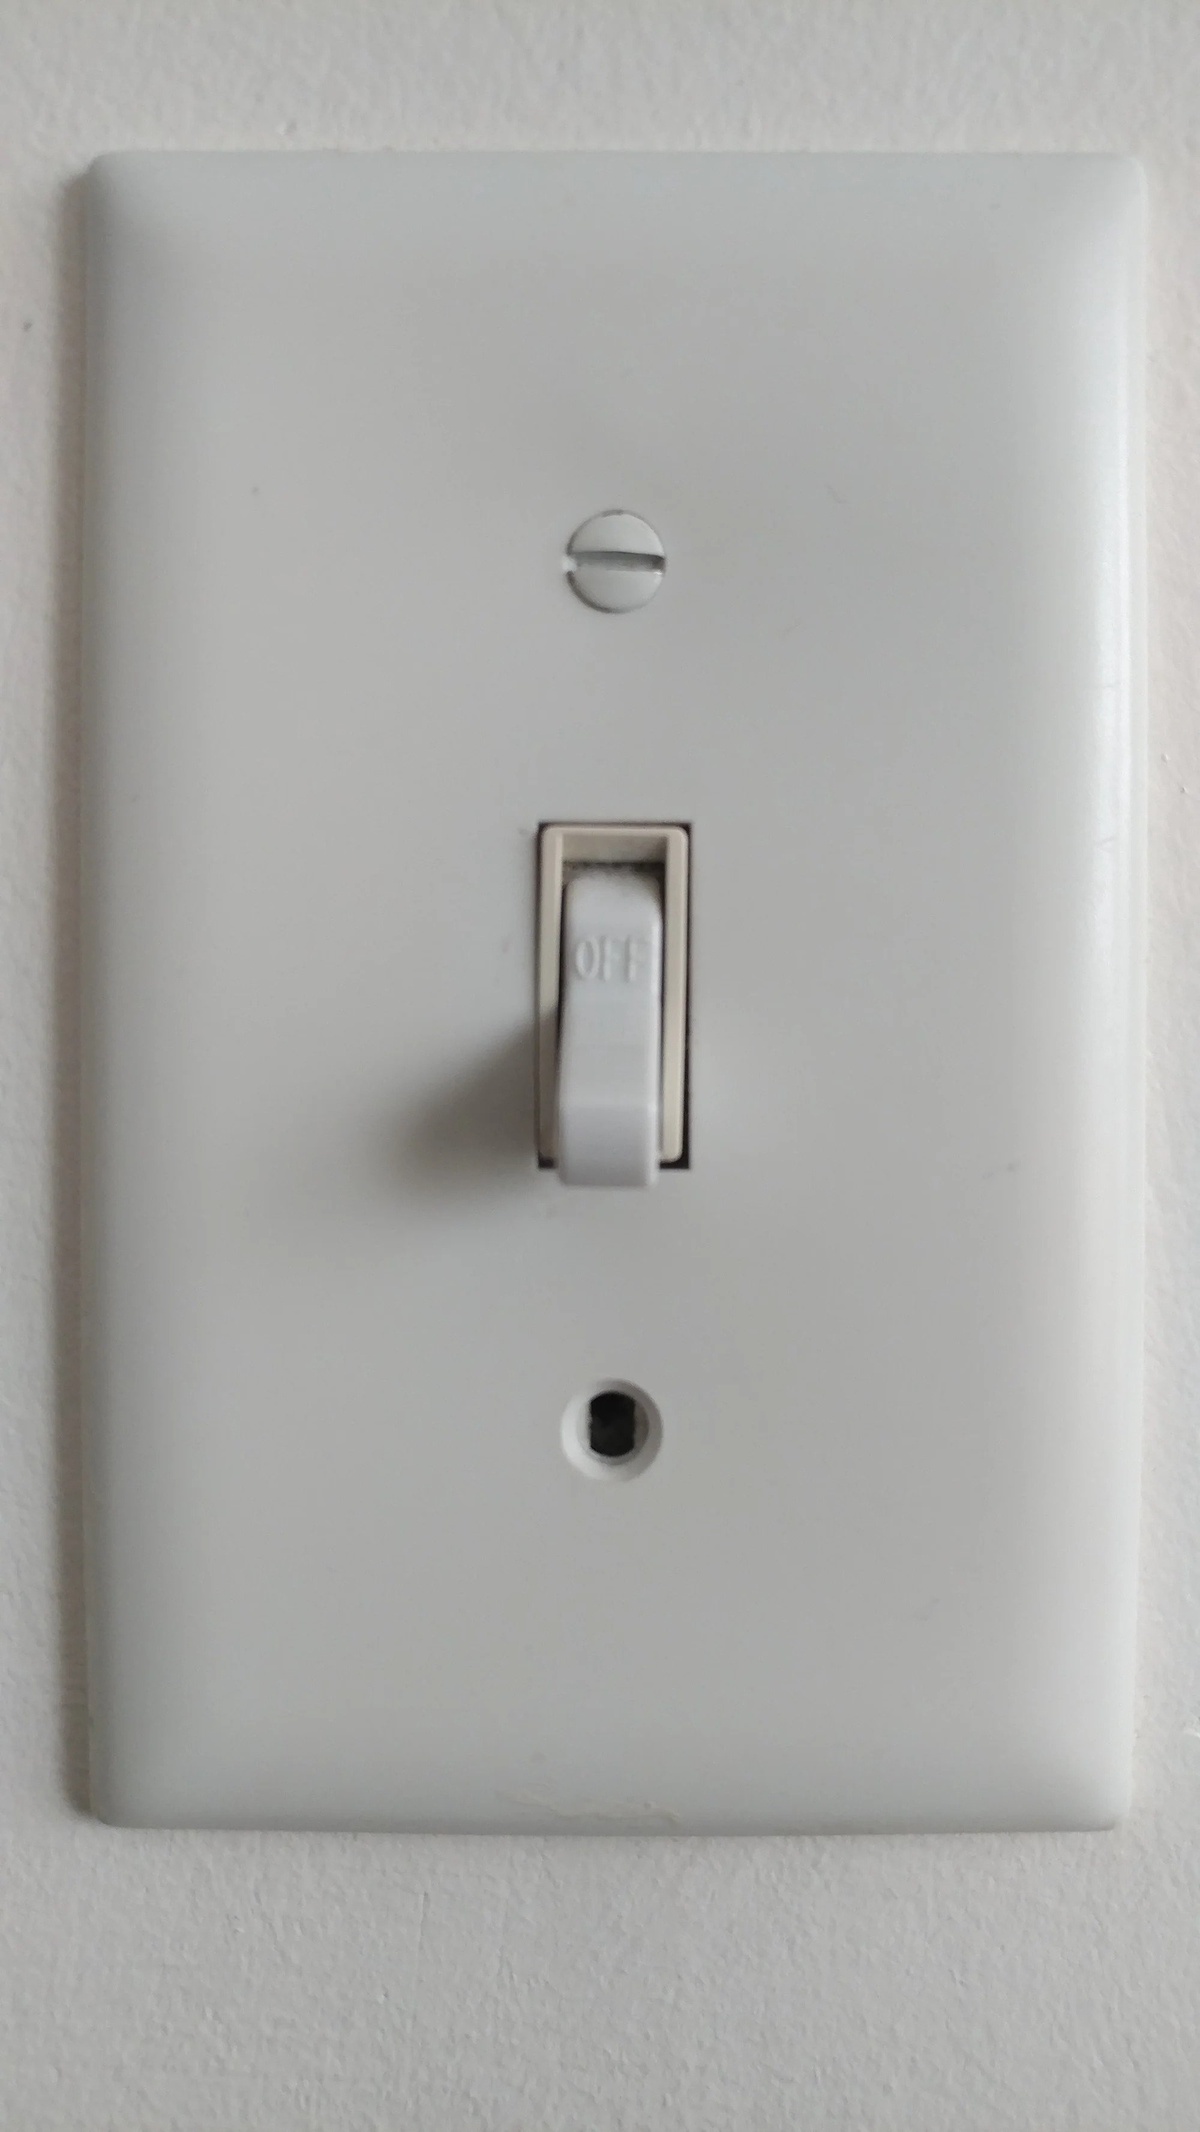 Camera in Light Switch: Your Covert Home Security Solution